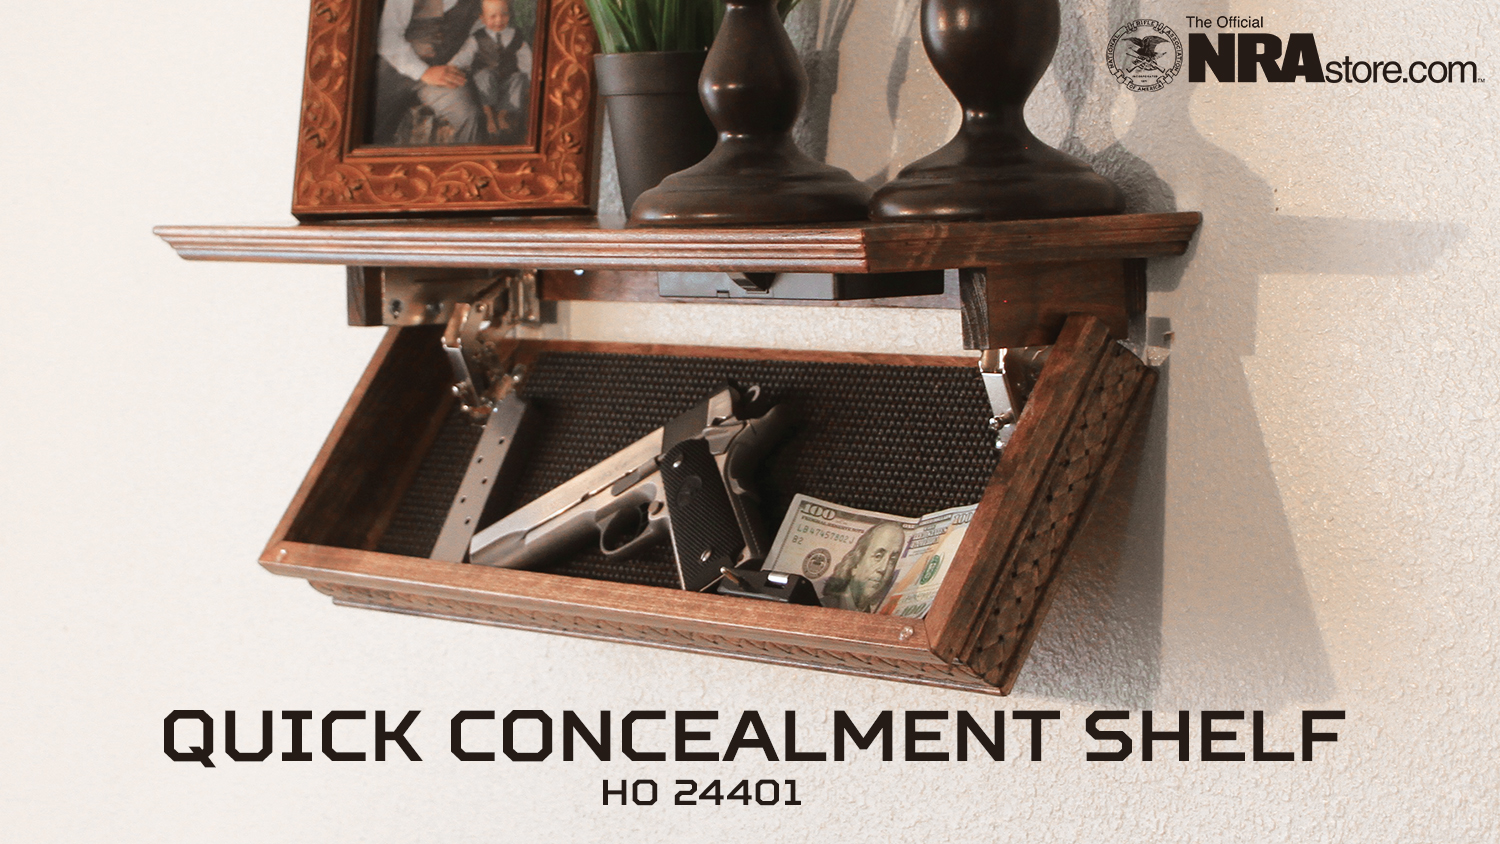 NRA Store Product Highlight: Quick Concealment Shelf